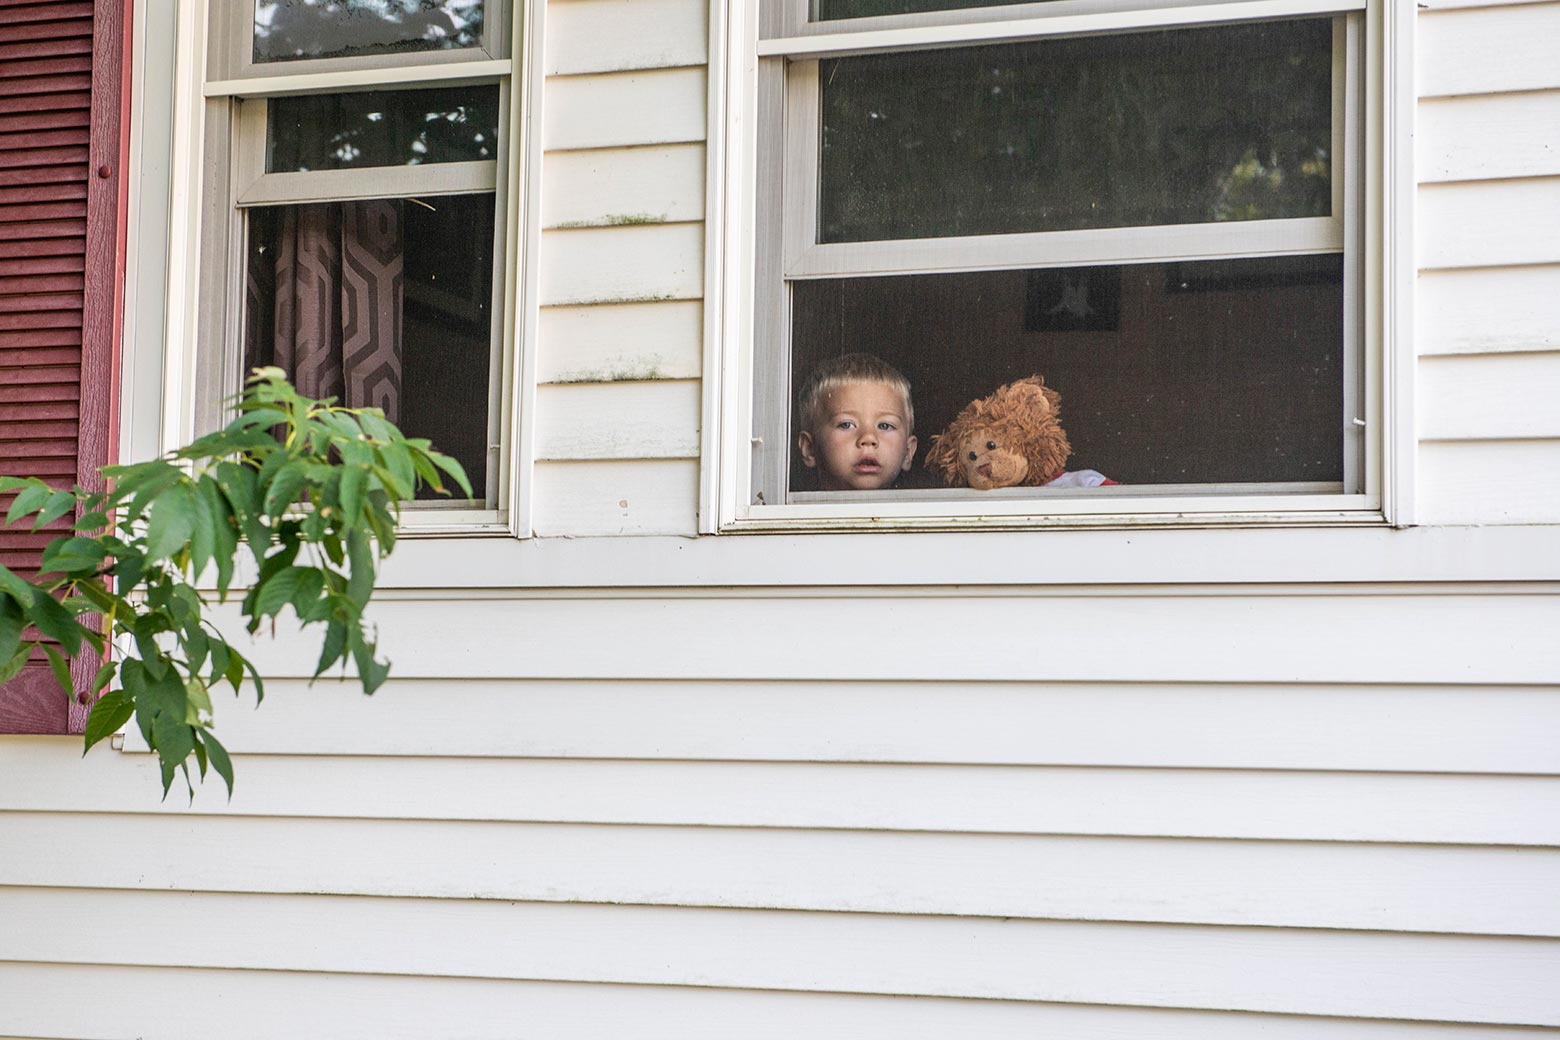 A boy with a stuffed animal beside him looks out a window